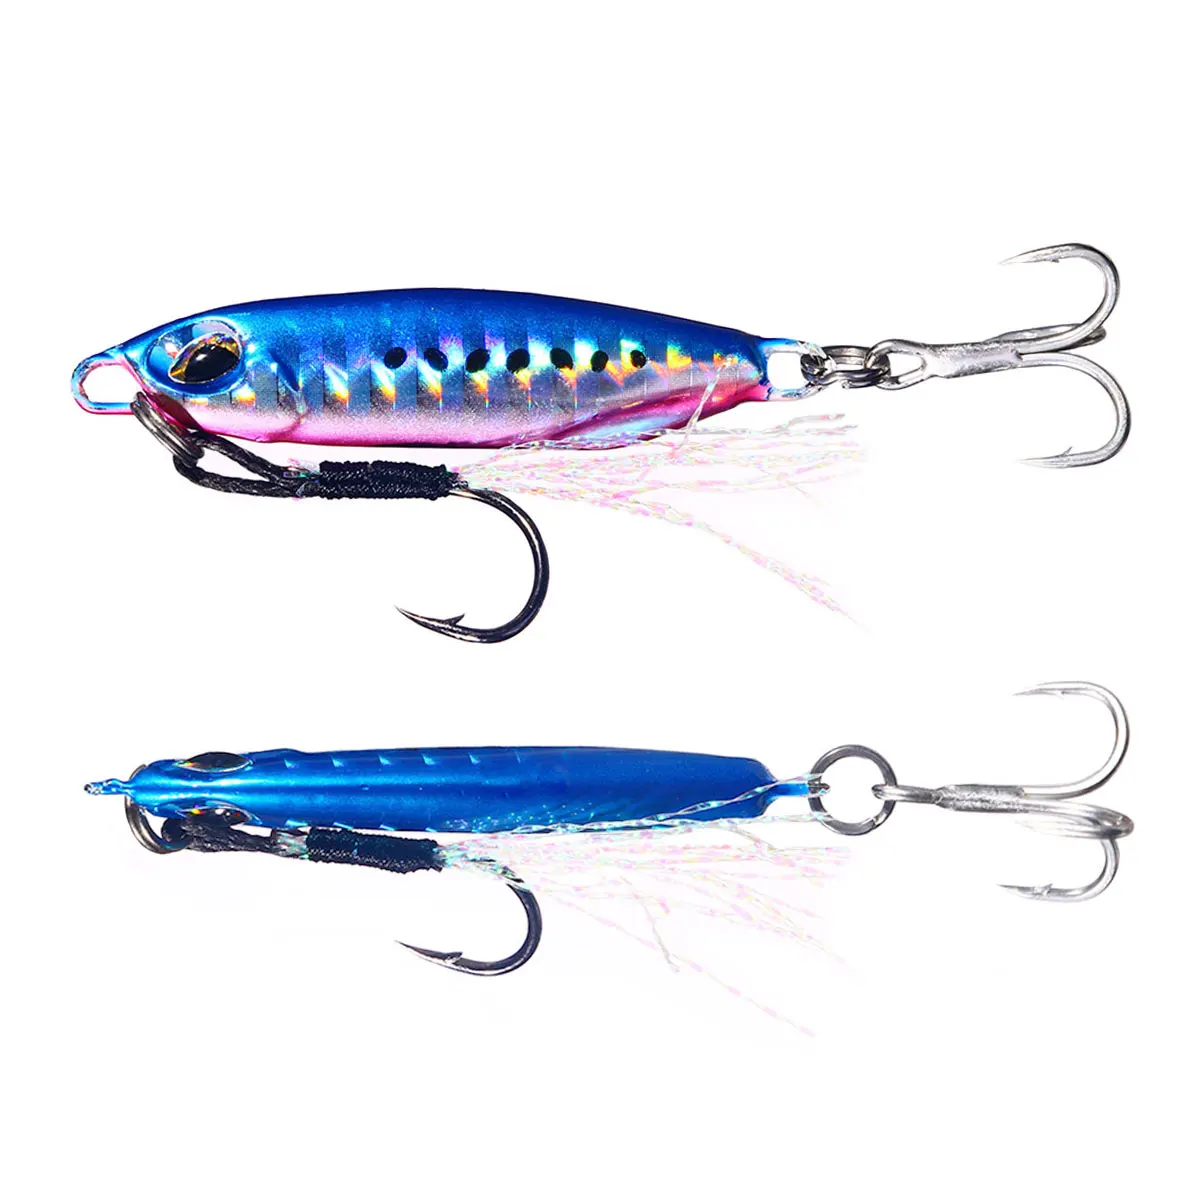 1pc Slow Sinking Metal Jigging Lure, With Weights Of 16g/32g For